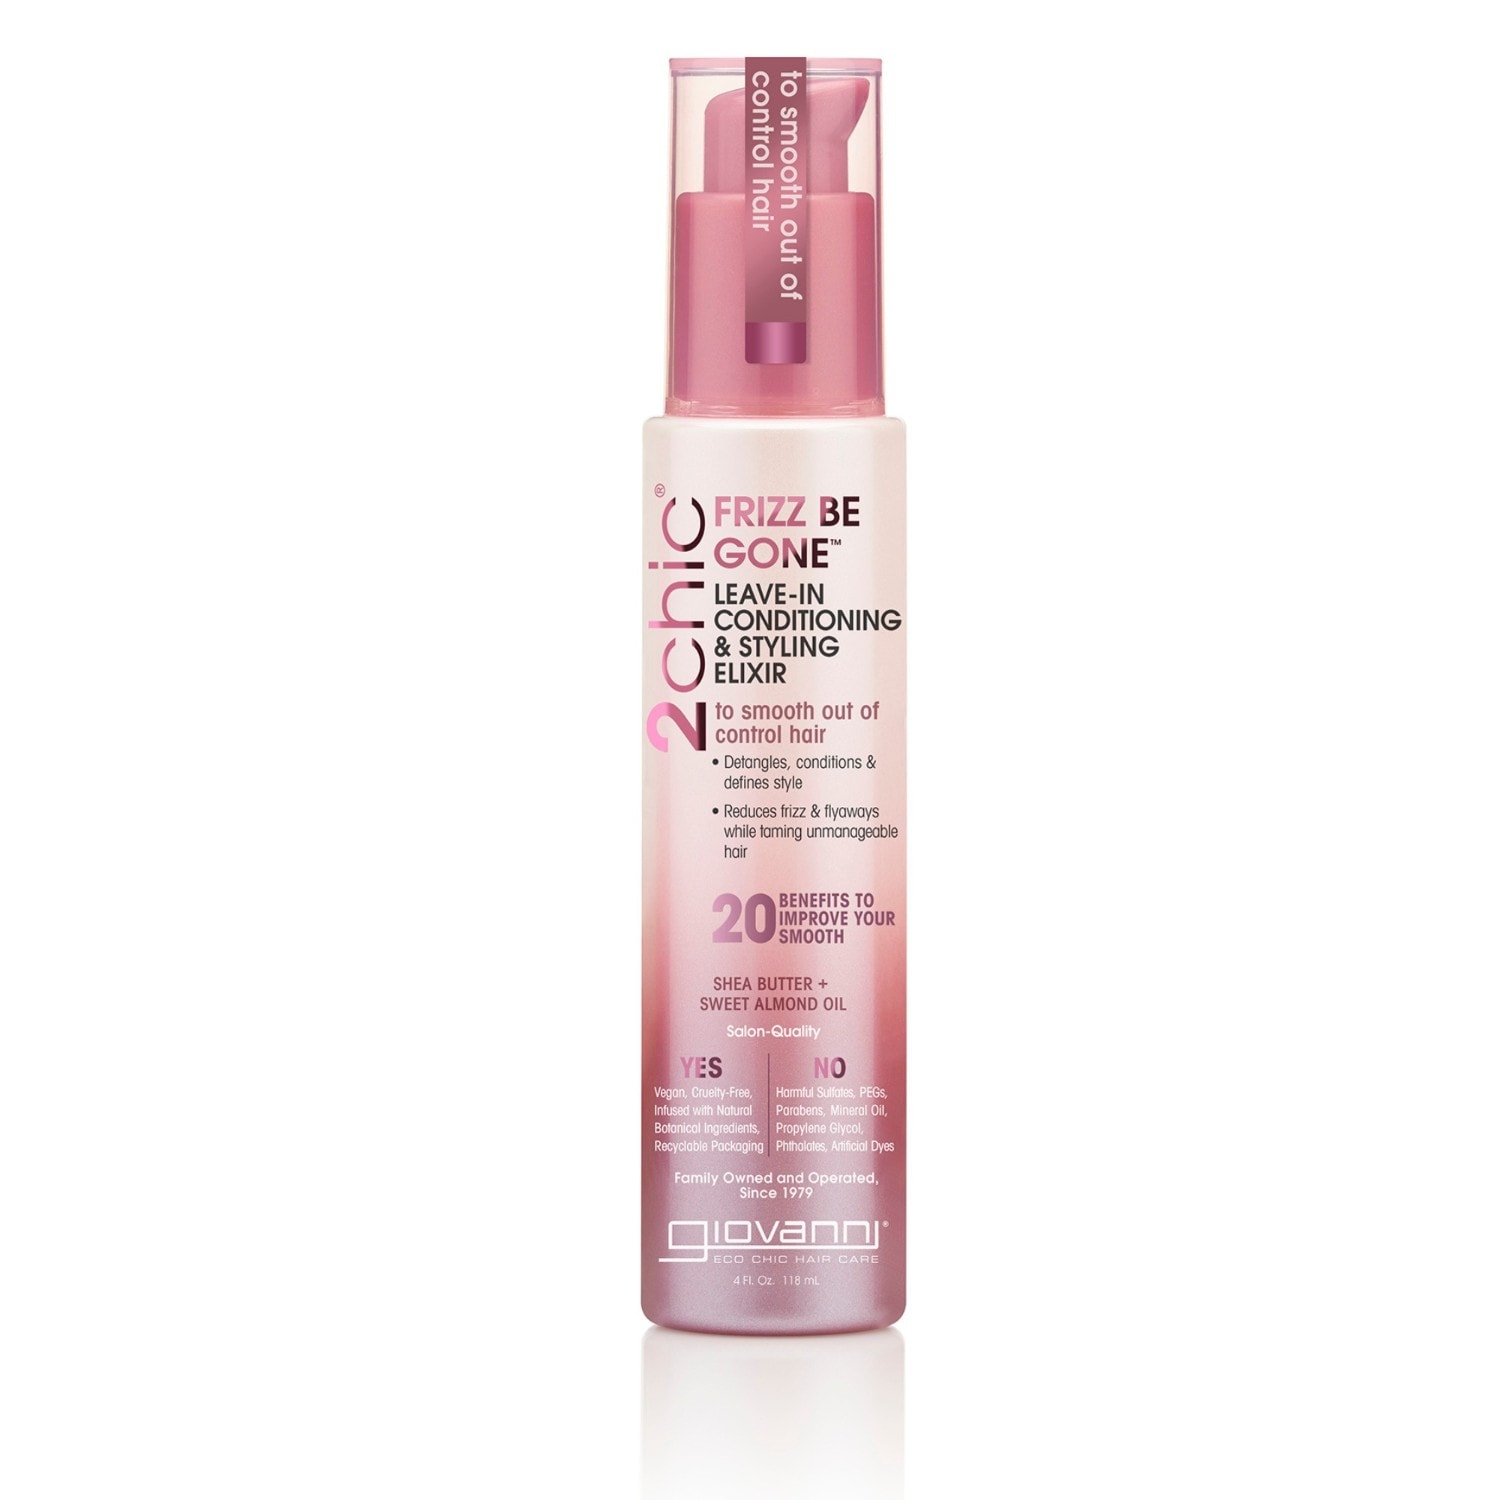 Giovanni 2chic Frizz Be Gone Leave-in Conditioning & Styling Elixir